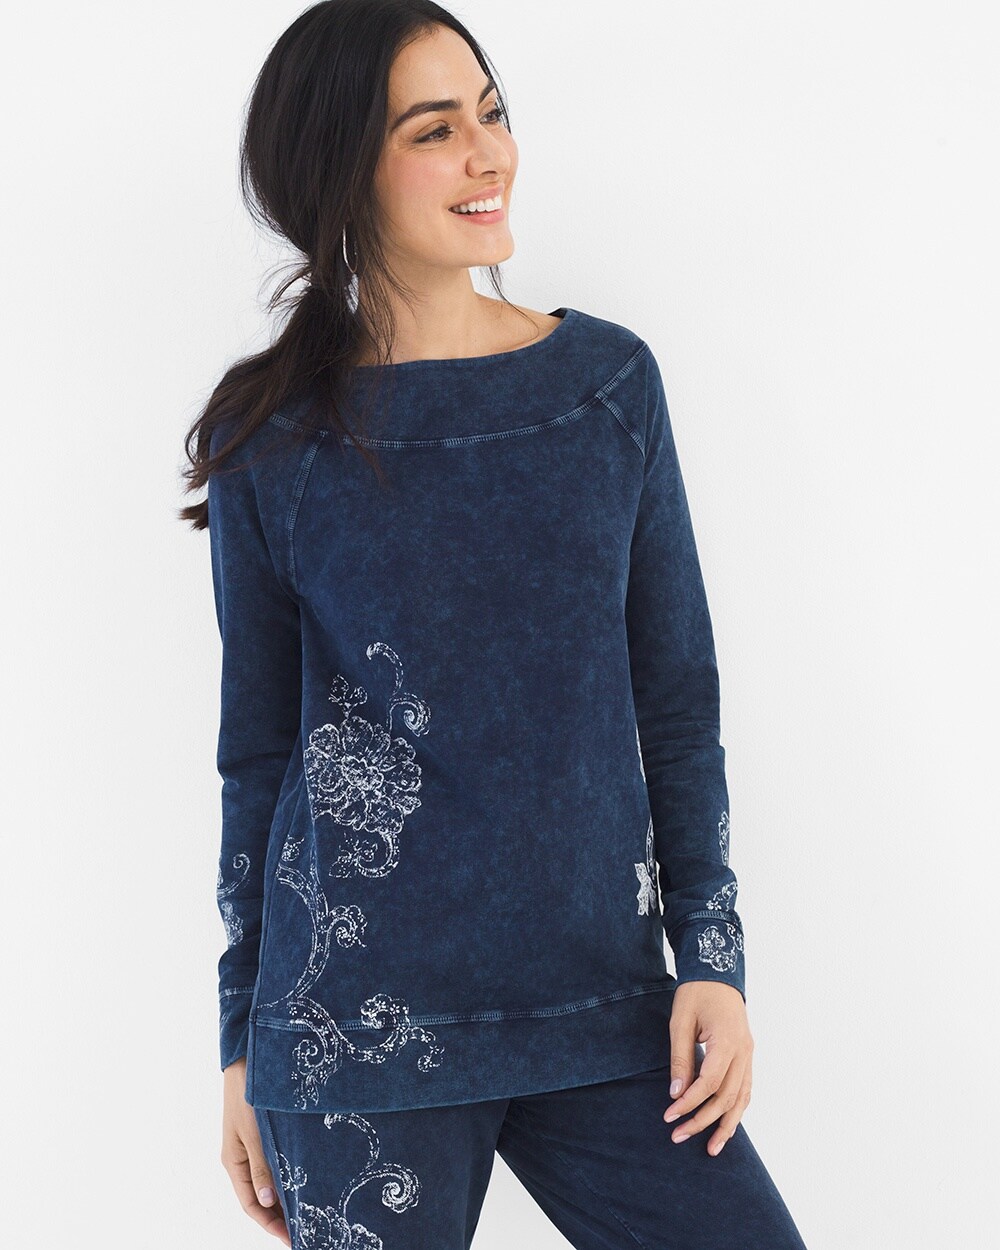 Zenergy Floral Scroll Tunic